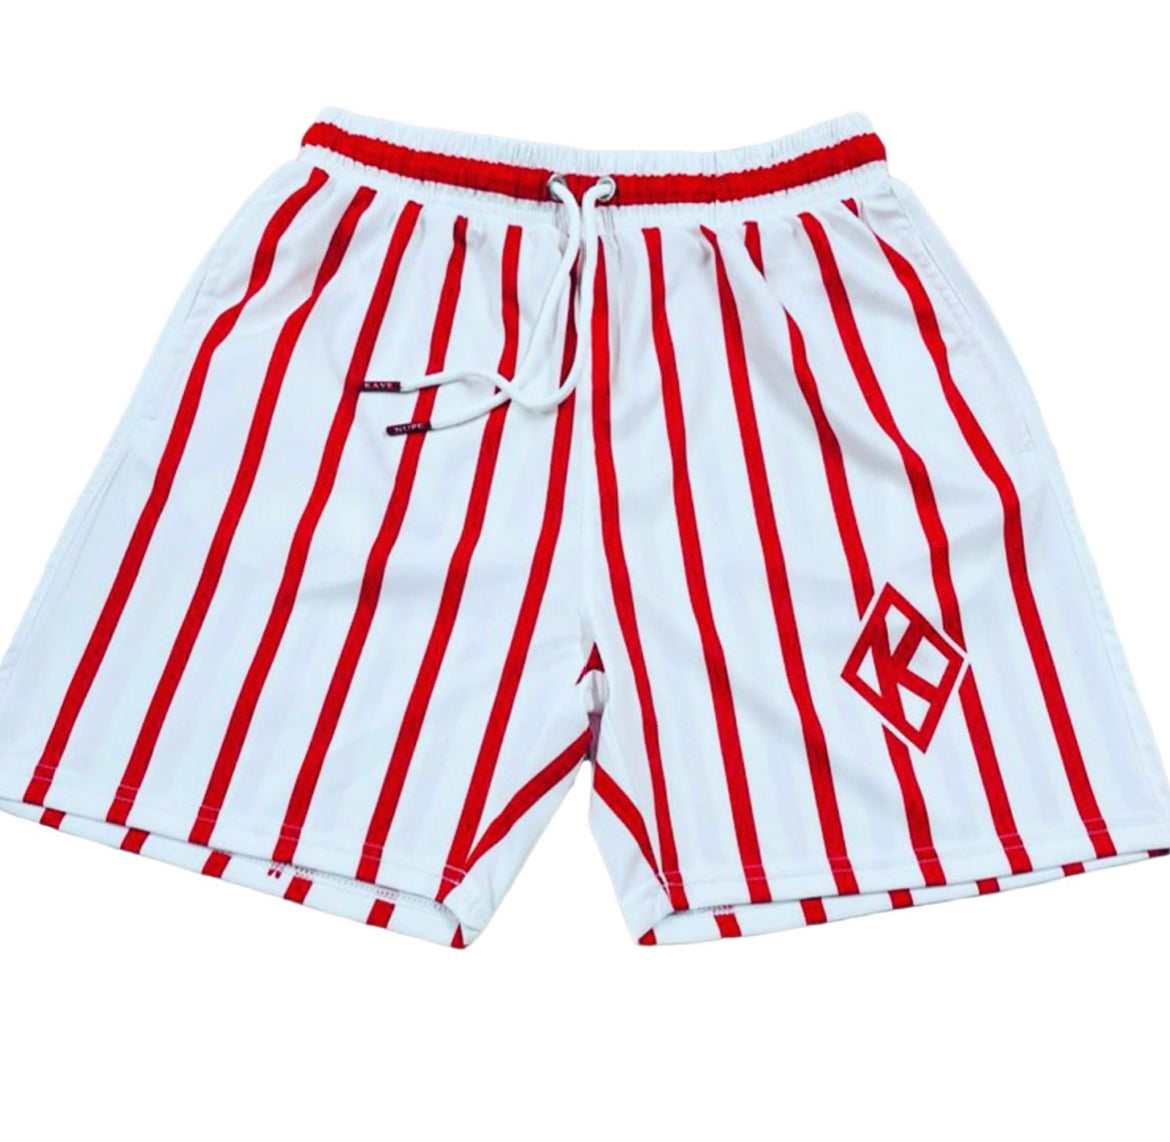 Get ready for some summer fun with these stylish Kappa Alpha Psi men's shorts. The striped pattern gives them a classic look, while the drawstring waist ensures a comfortable fit for all-day wear. Perfect for any beach or pool day, these shorts are a must-have for any fashionable man's wardrobe.